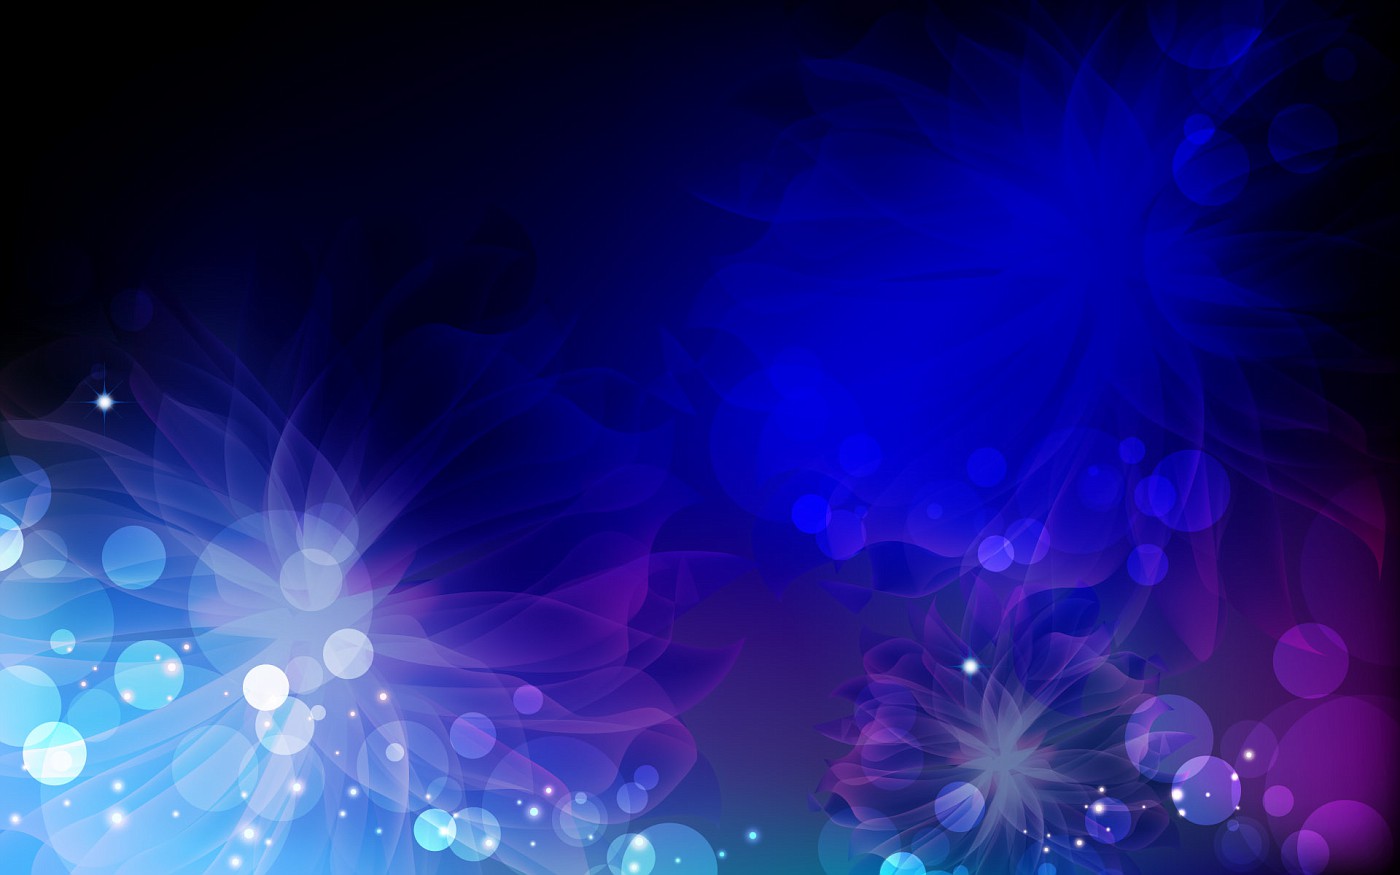 Photo: 3d-abstract-handsome-3d-abstract-high-quality-widescreen-abstract- blue-background-hd-imagery-wallpaper-desktop-abstract-blue-background- photoshop-abstract-blue-background-vector-graphic-1-abstract-blu | Wallpaper  BG album  NEW ...